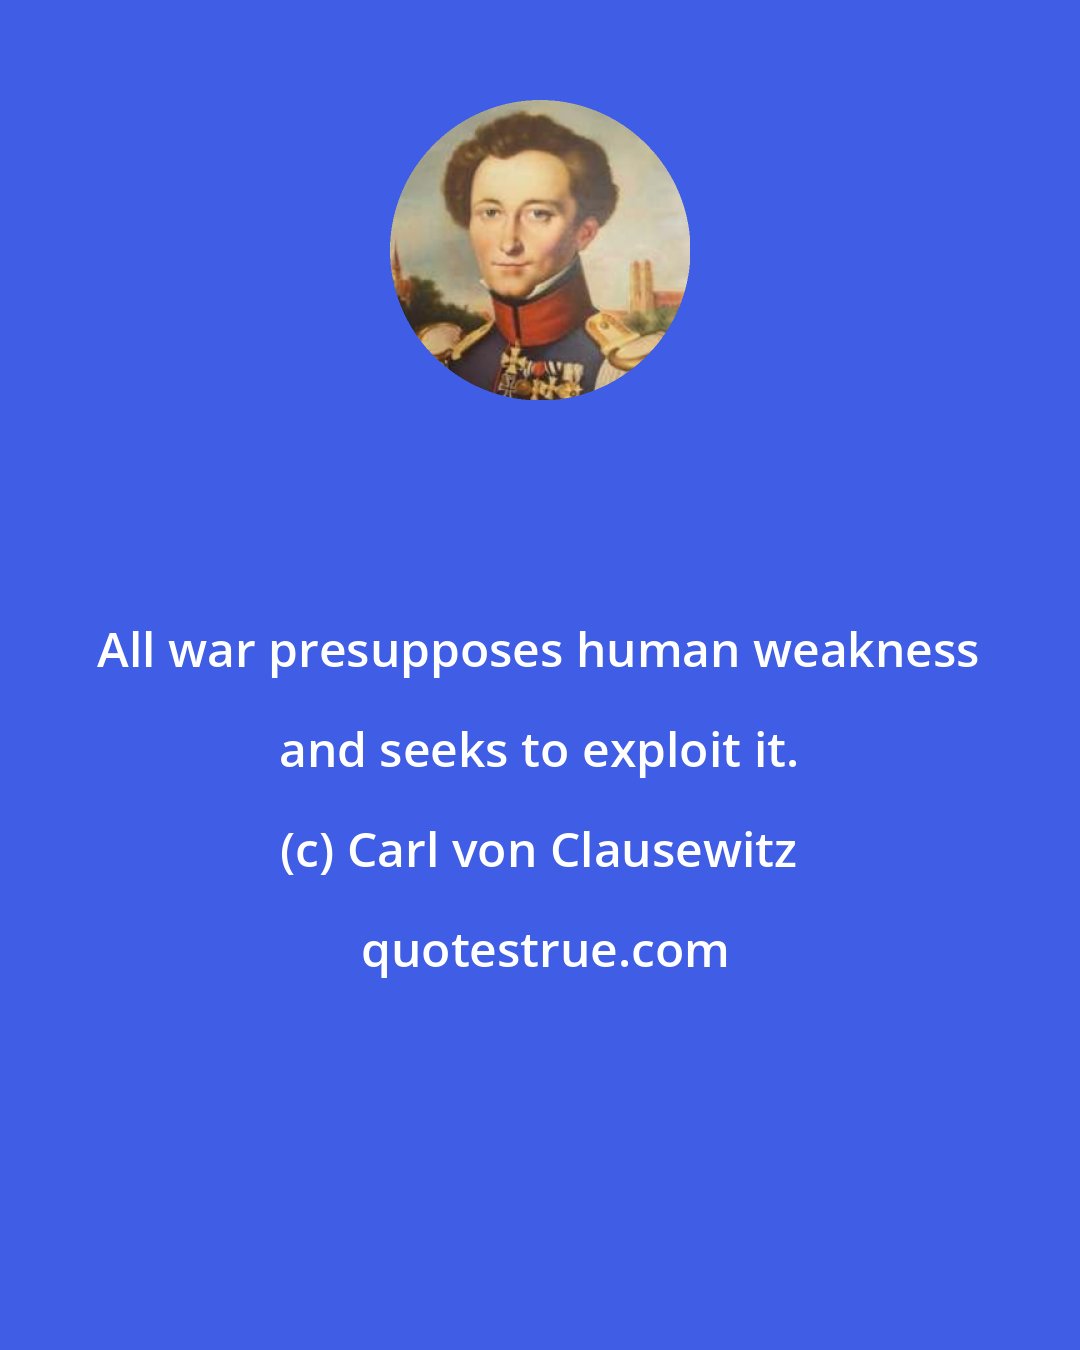 Carl von Clausewitz: All war presupposes human weakness and seeks to exploit it.